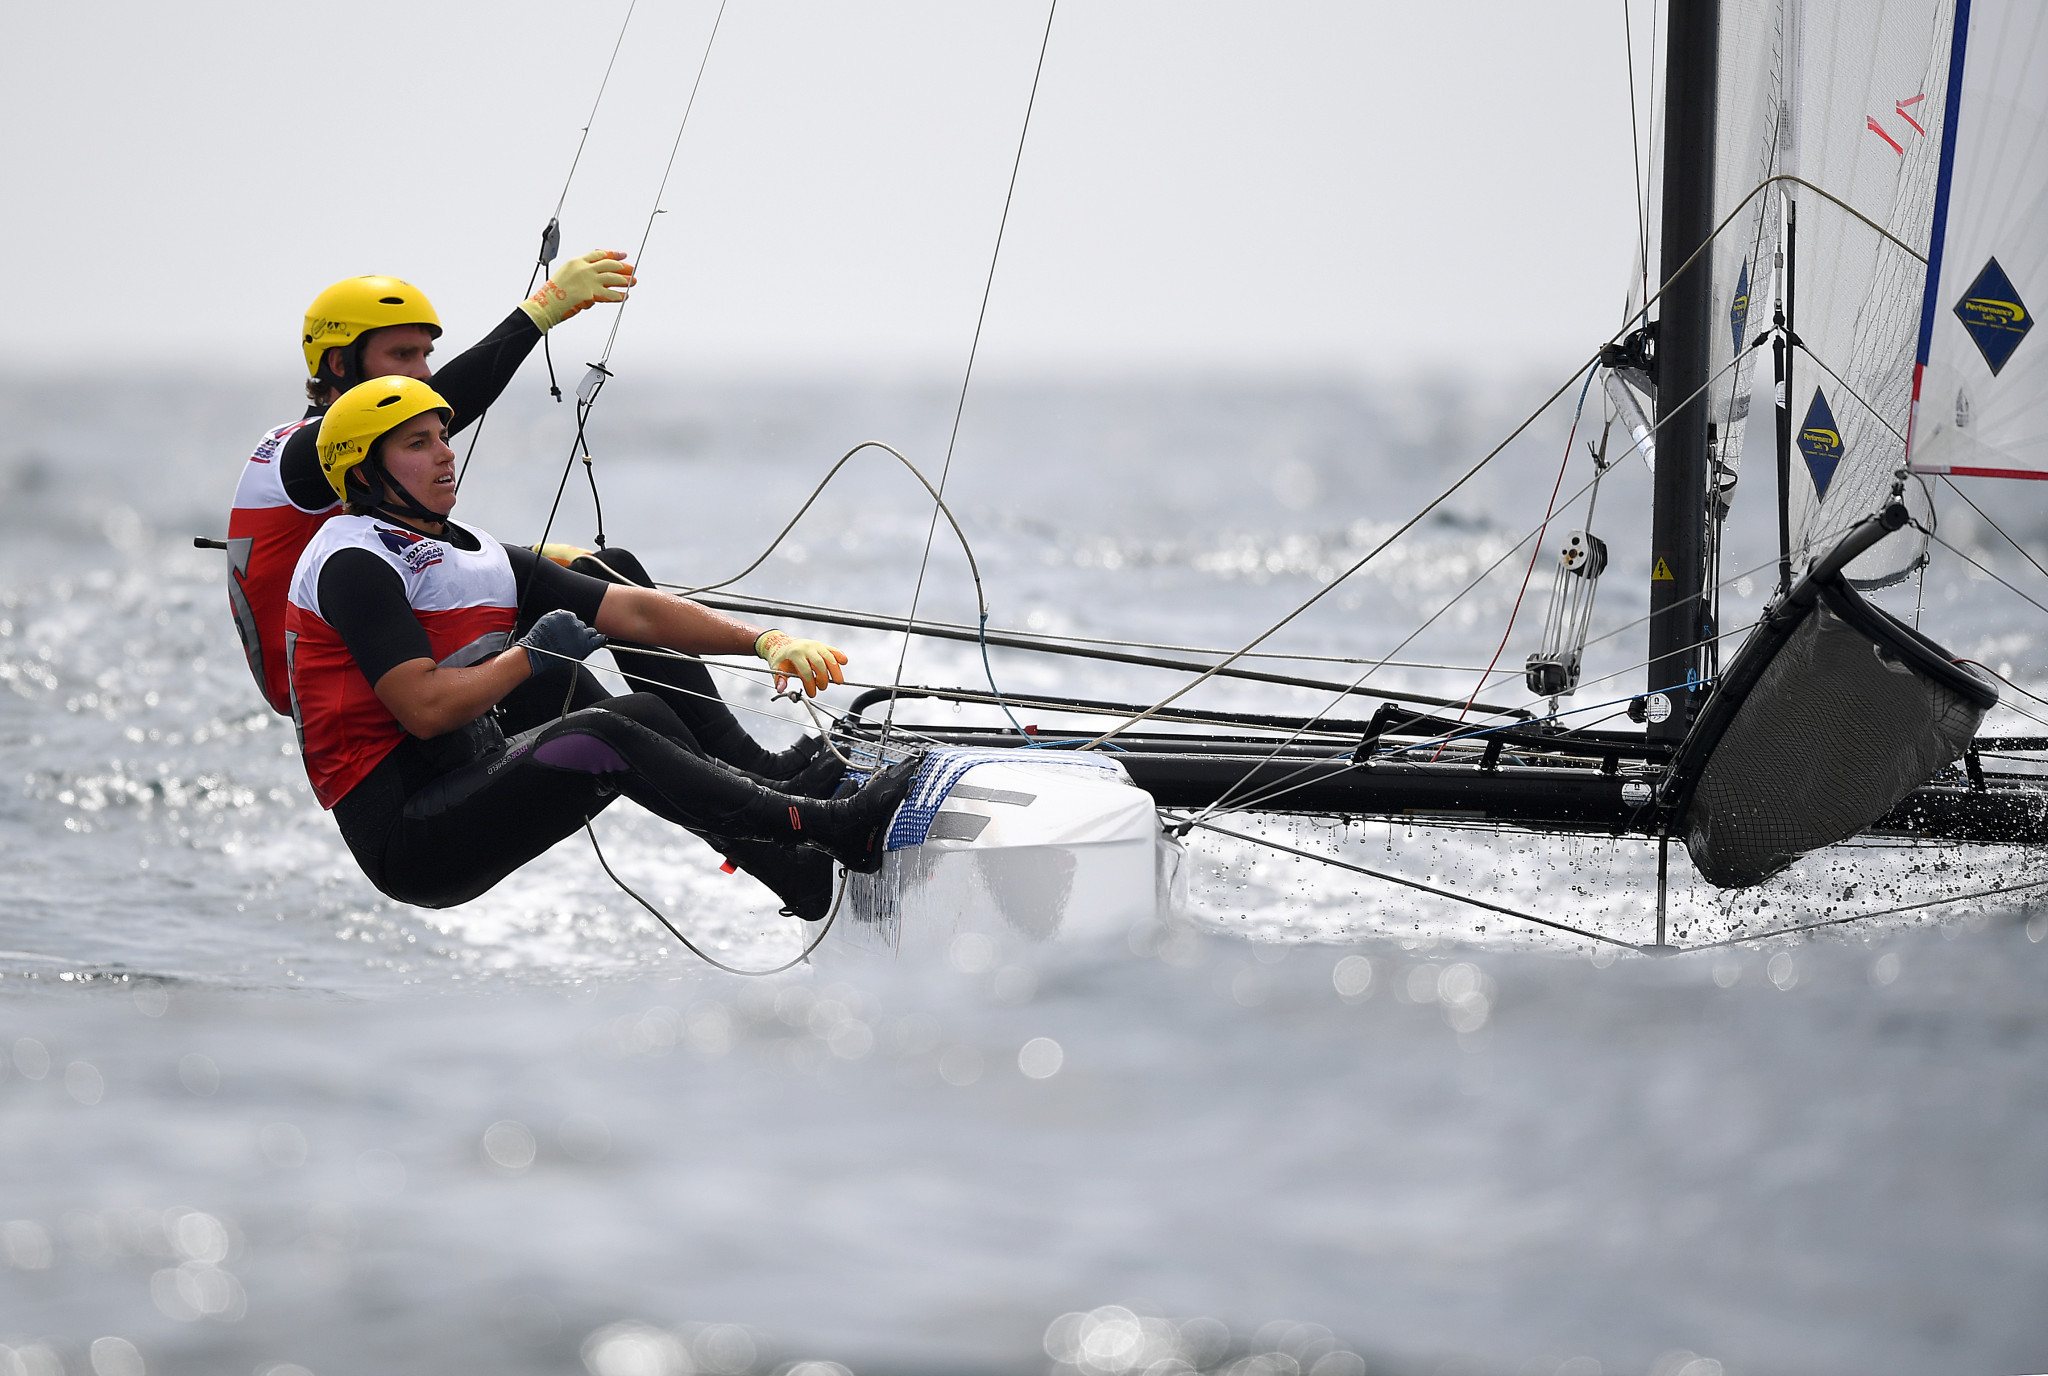 Italy's Vittorio Bissaro and Maelle Frascari lead the Nacra 17 standings in Mussanah ©Getty Images